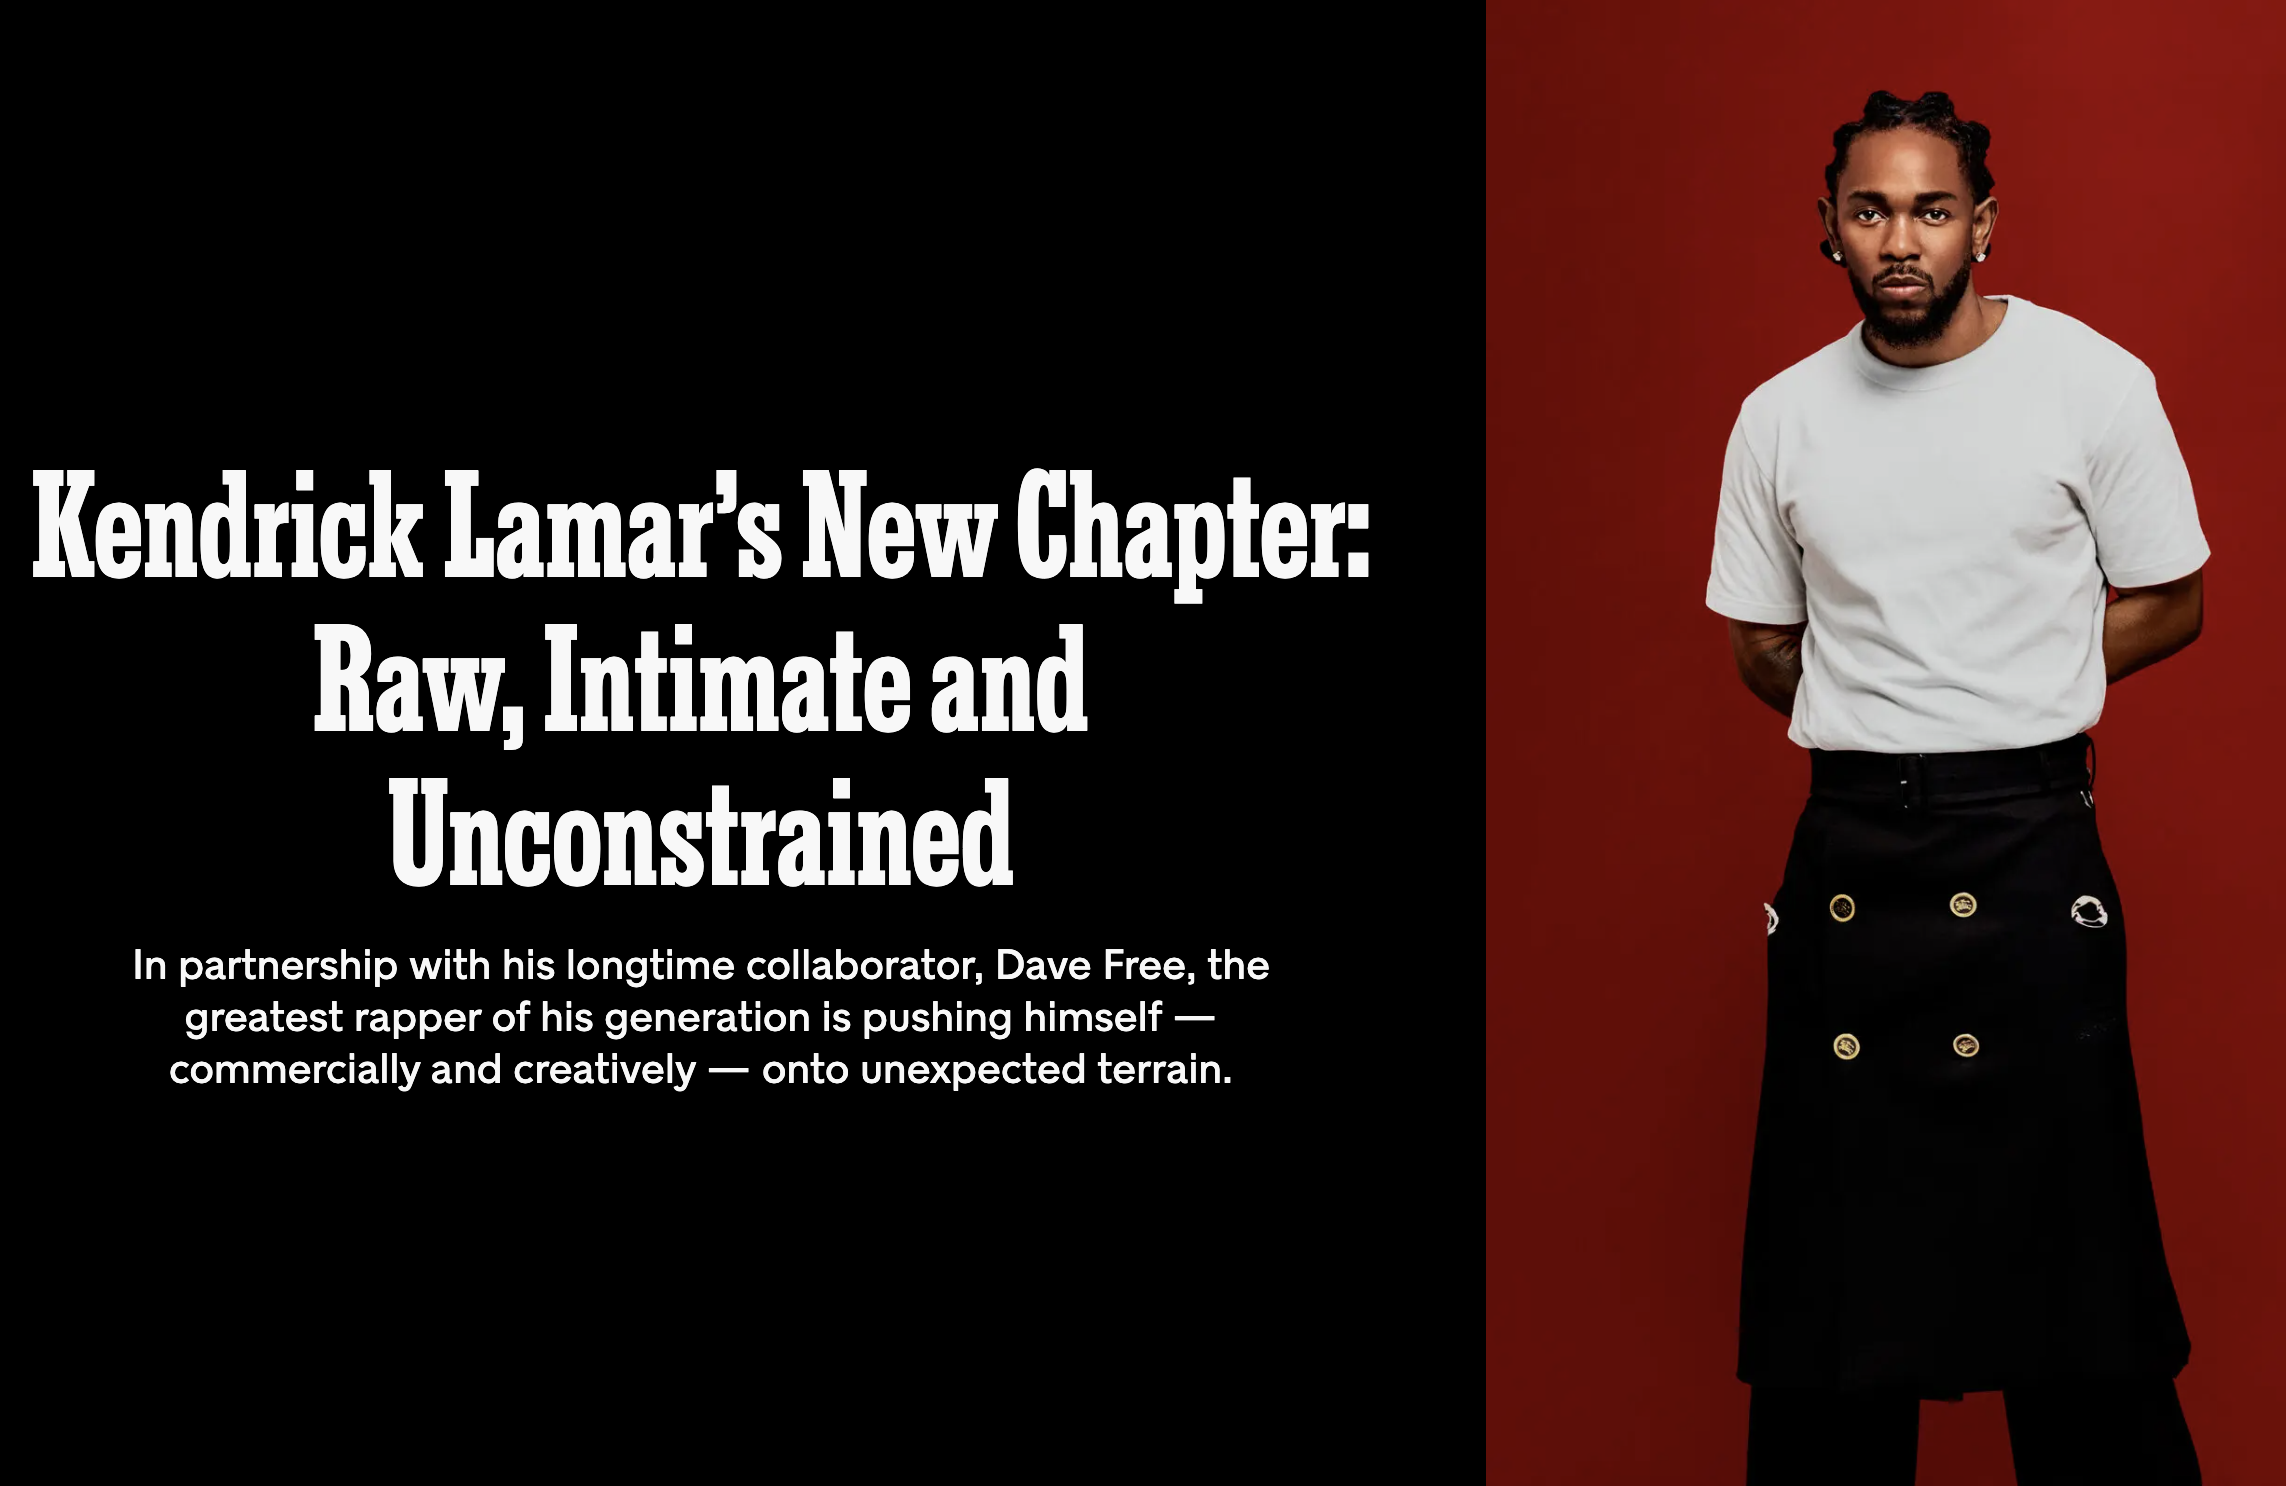 Kendrick Lamar's New Chapter With Dave Free - The New York Times